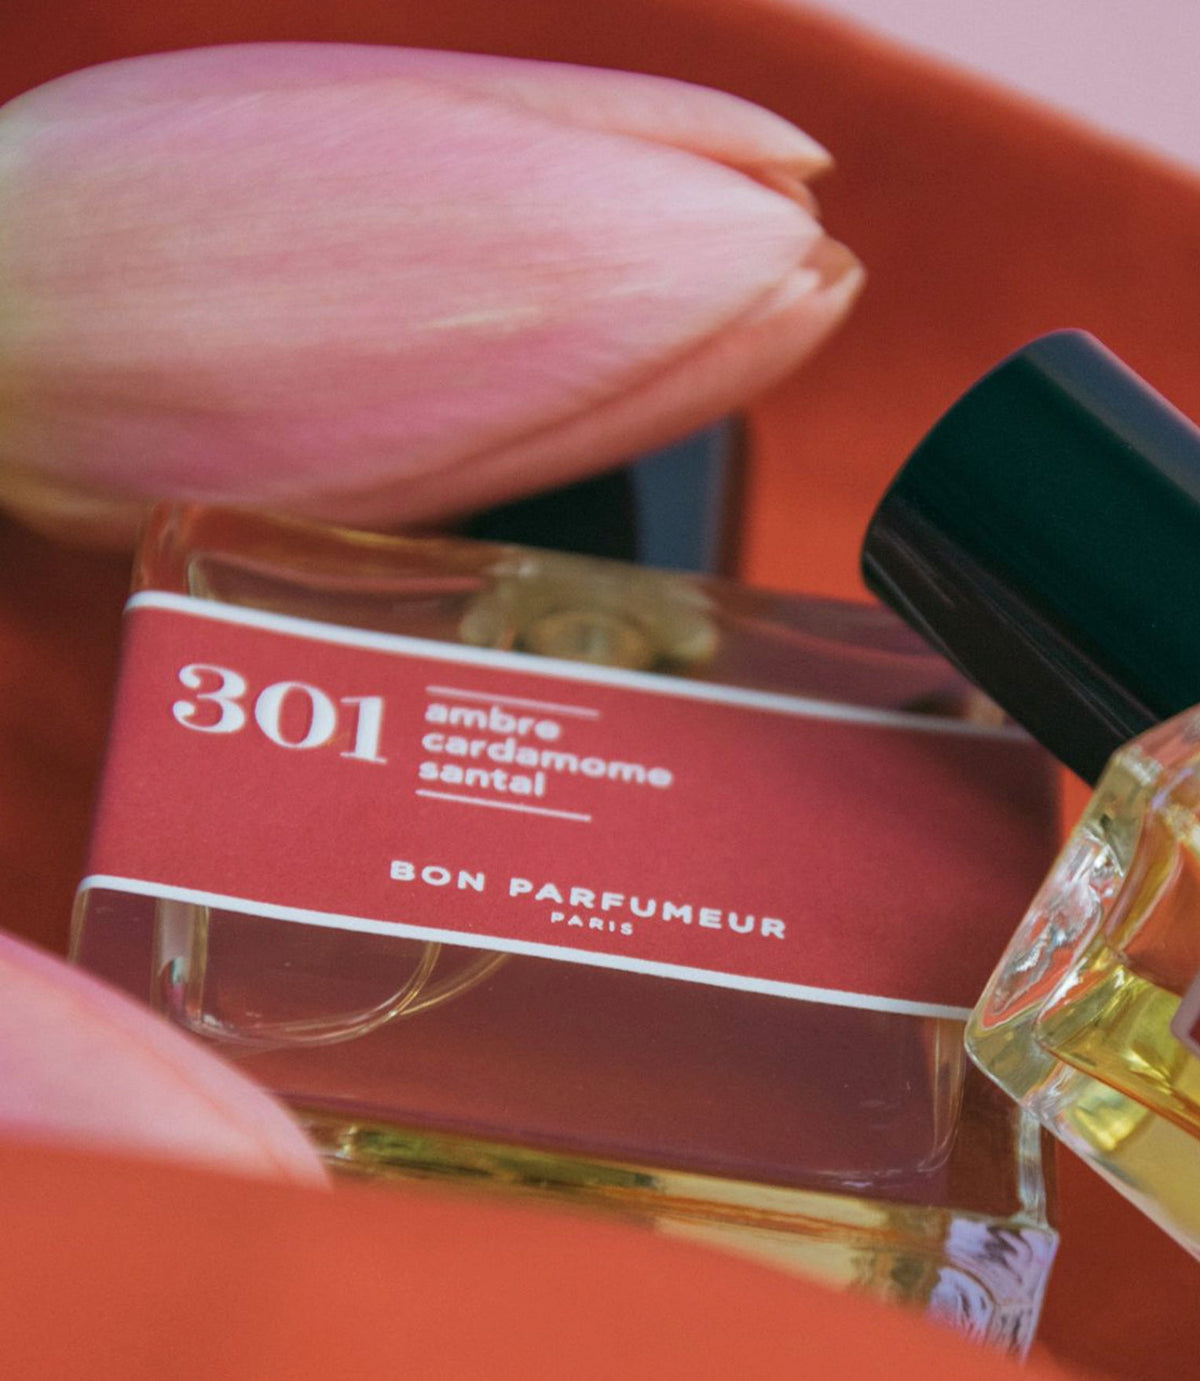 Eau de Parfum 301 Amber and Spices: Sandalwood, Amber and Cardamom 30ml